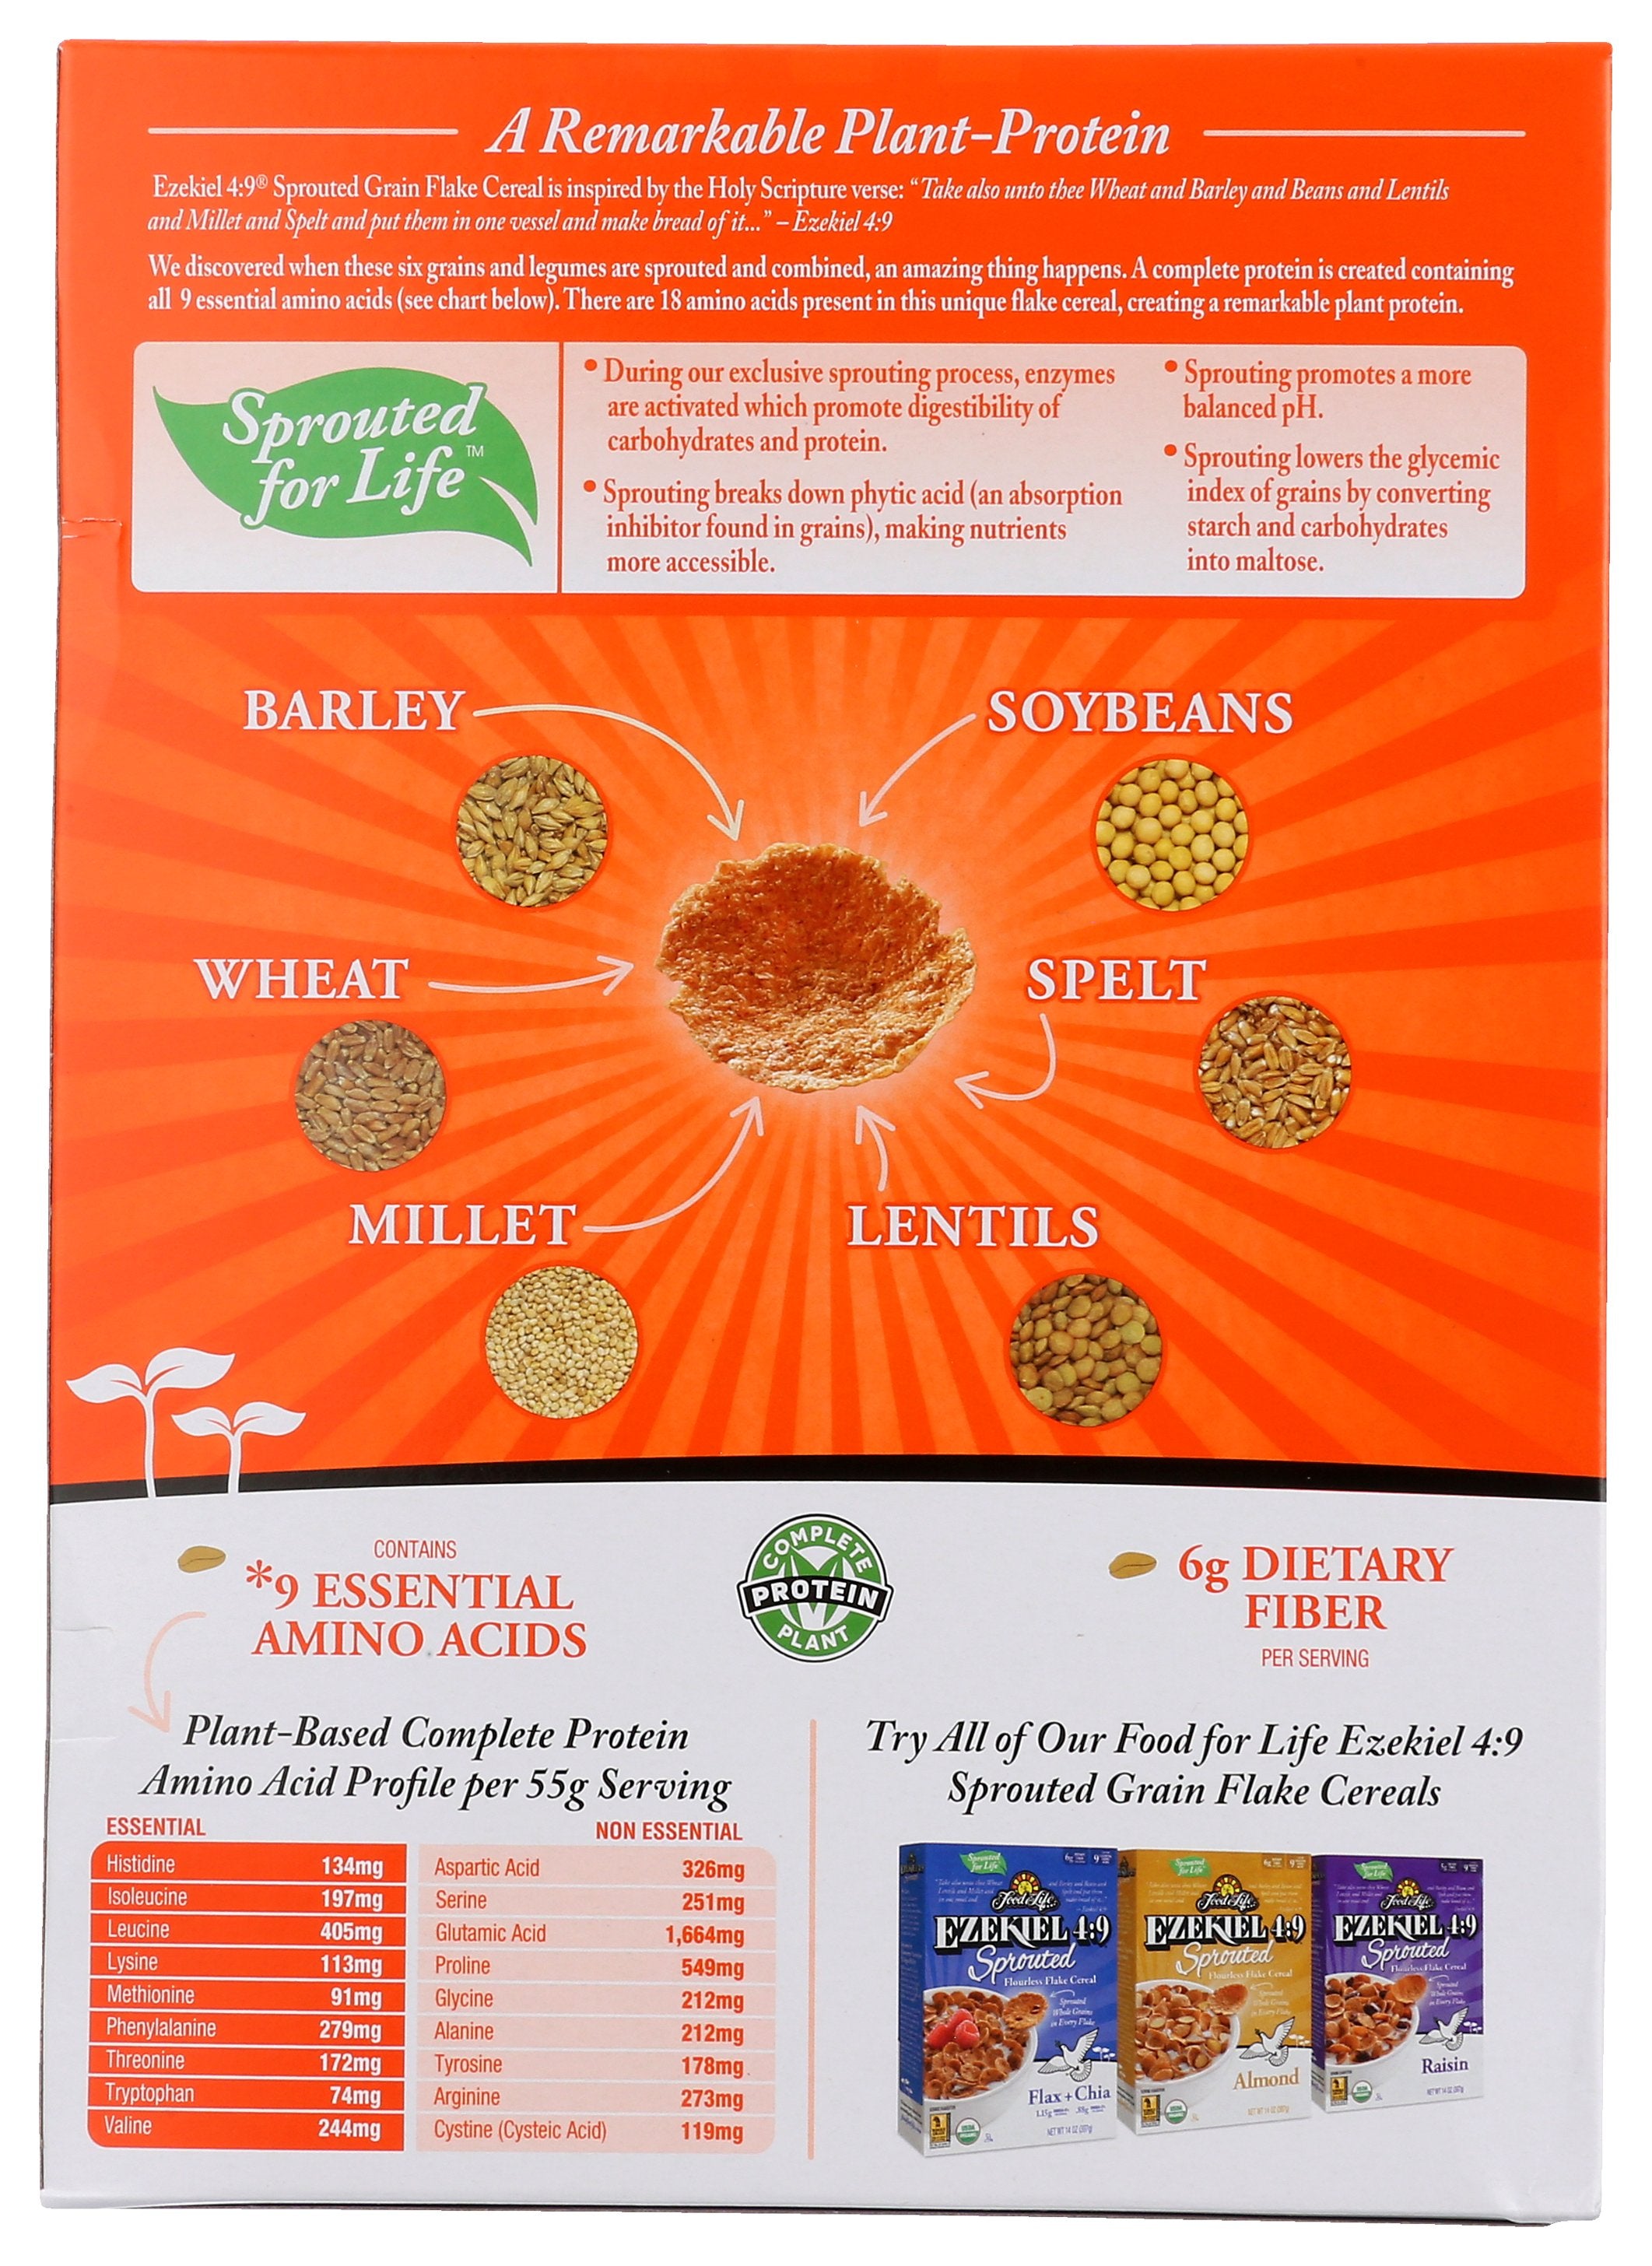 FOOD FOR LIFE CEREAL FLAKED SPRTD ORG - Case of 6